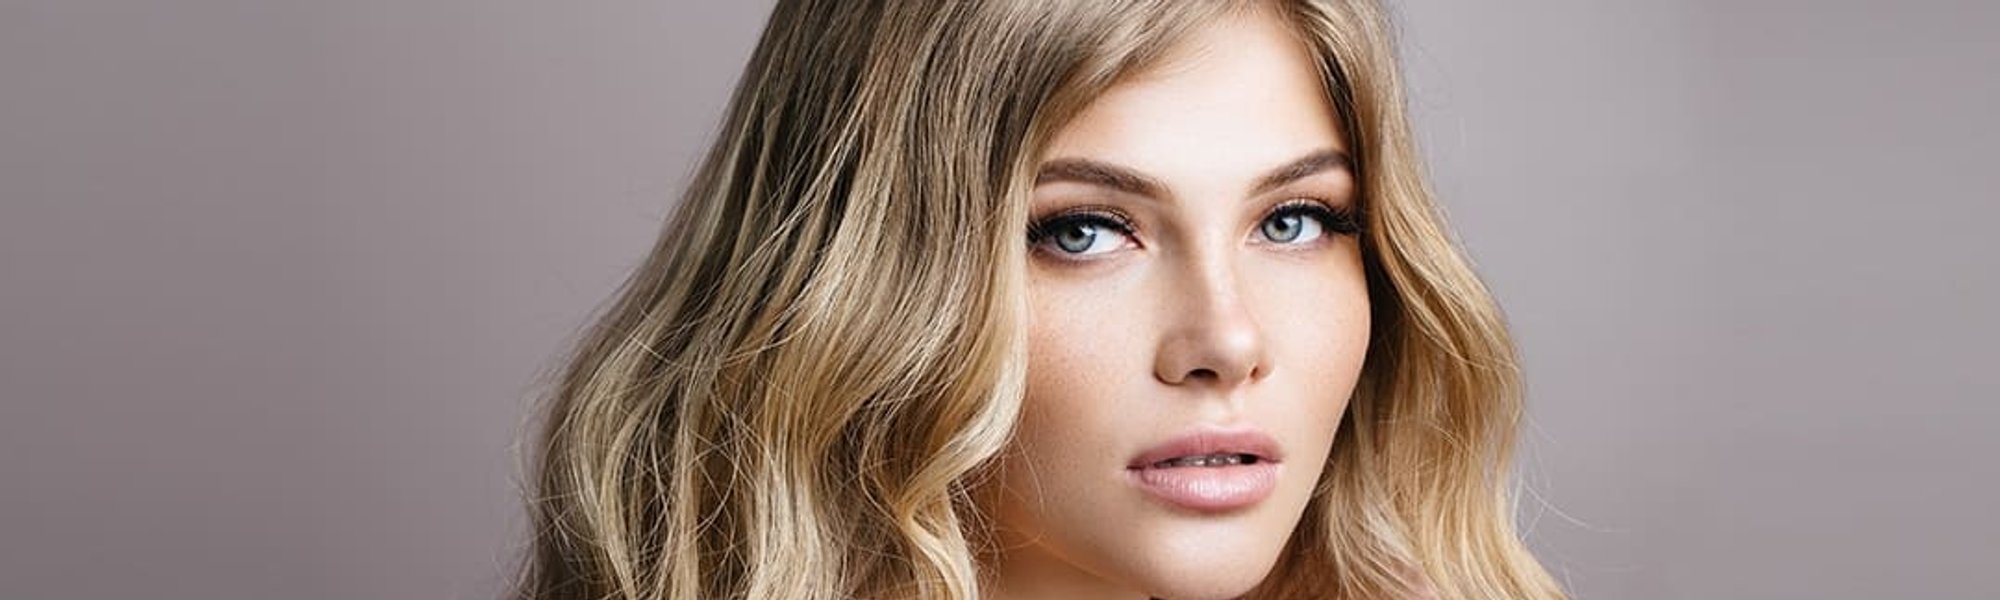 How To Pick The Most Complementary Blonde Hair Colour Shade For You 1080x476